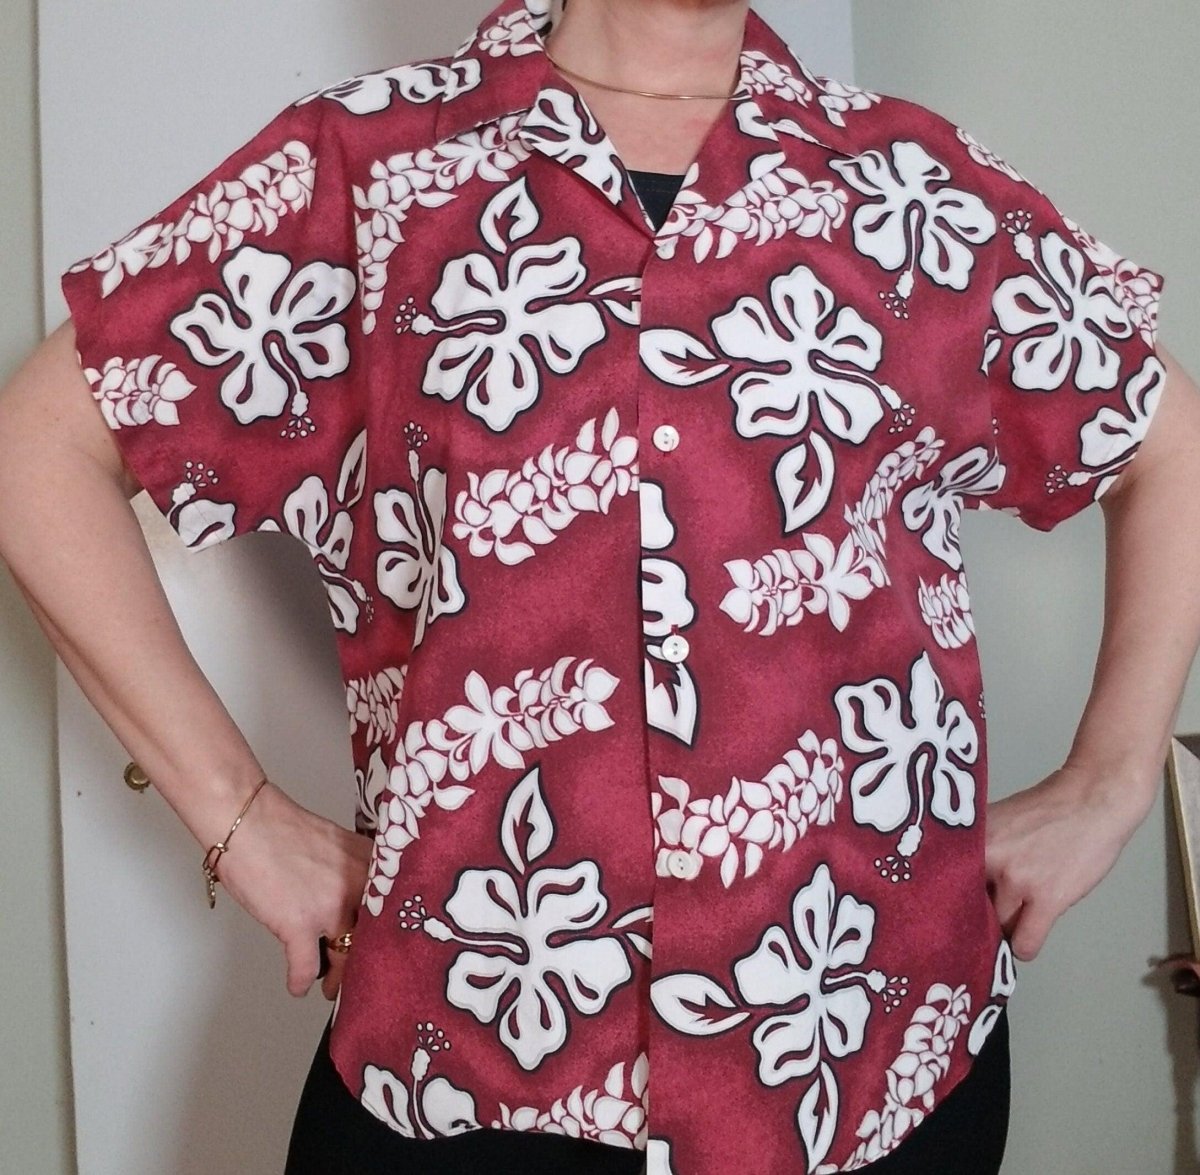 90s Maroon and White Hawaiian Shirt Women's Large - themallvintage The Mall Vintage